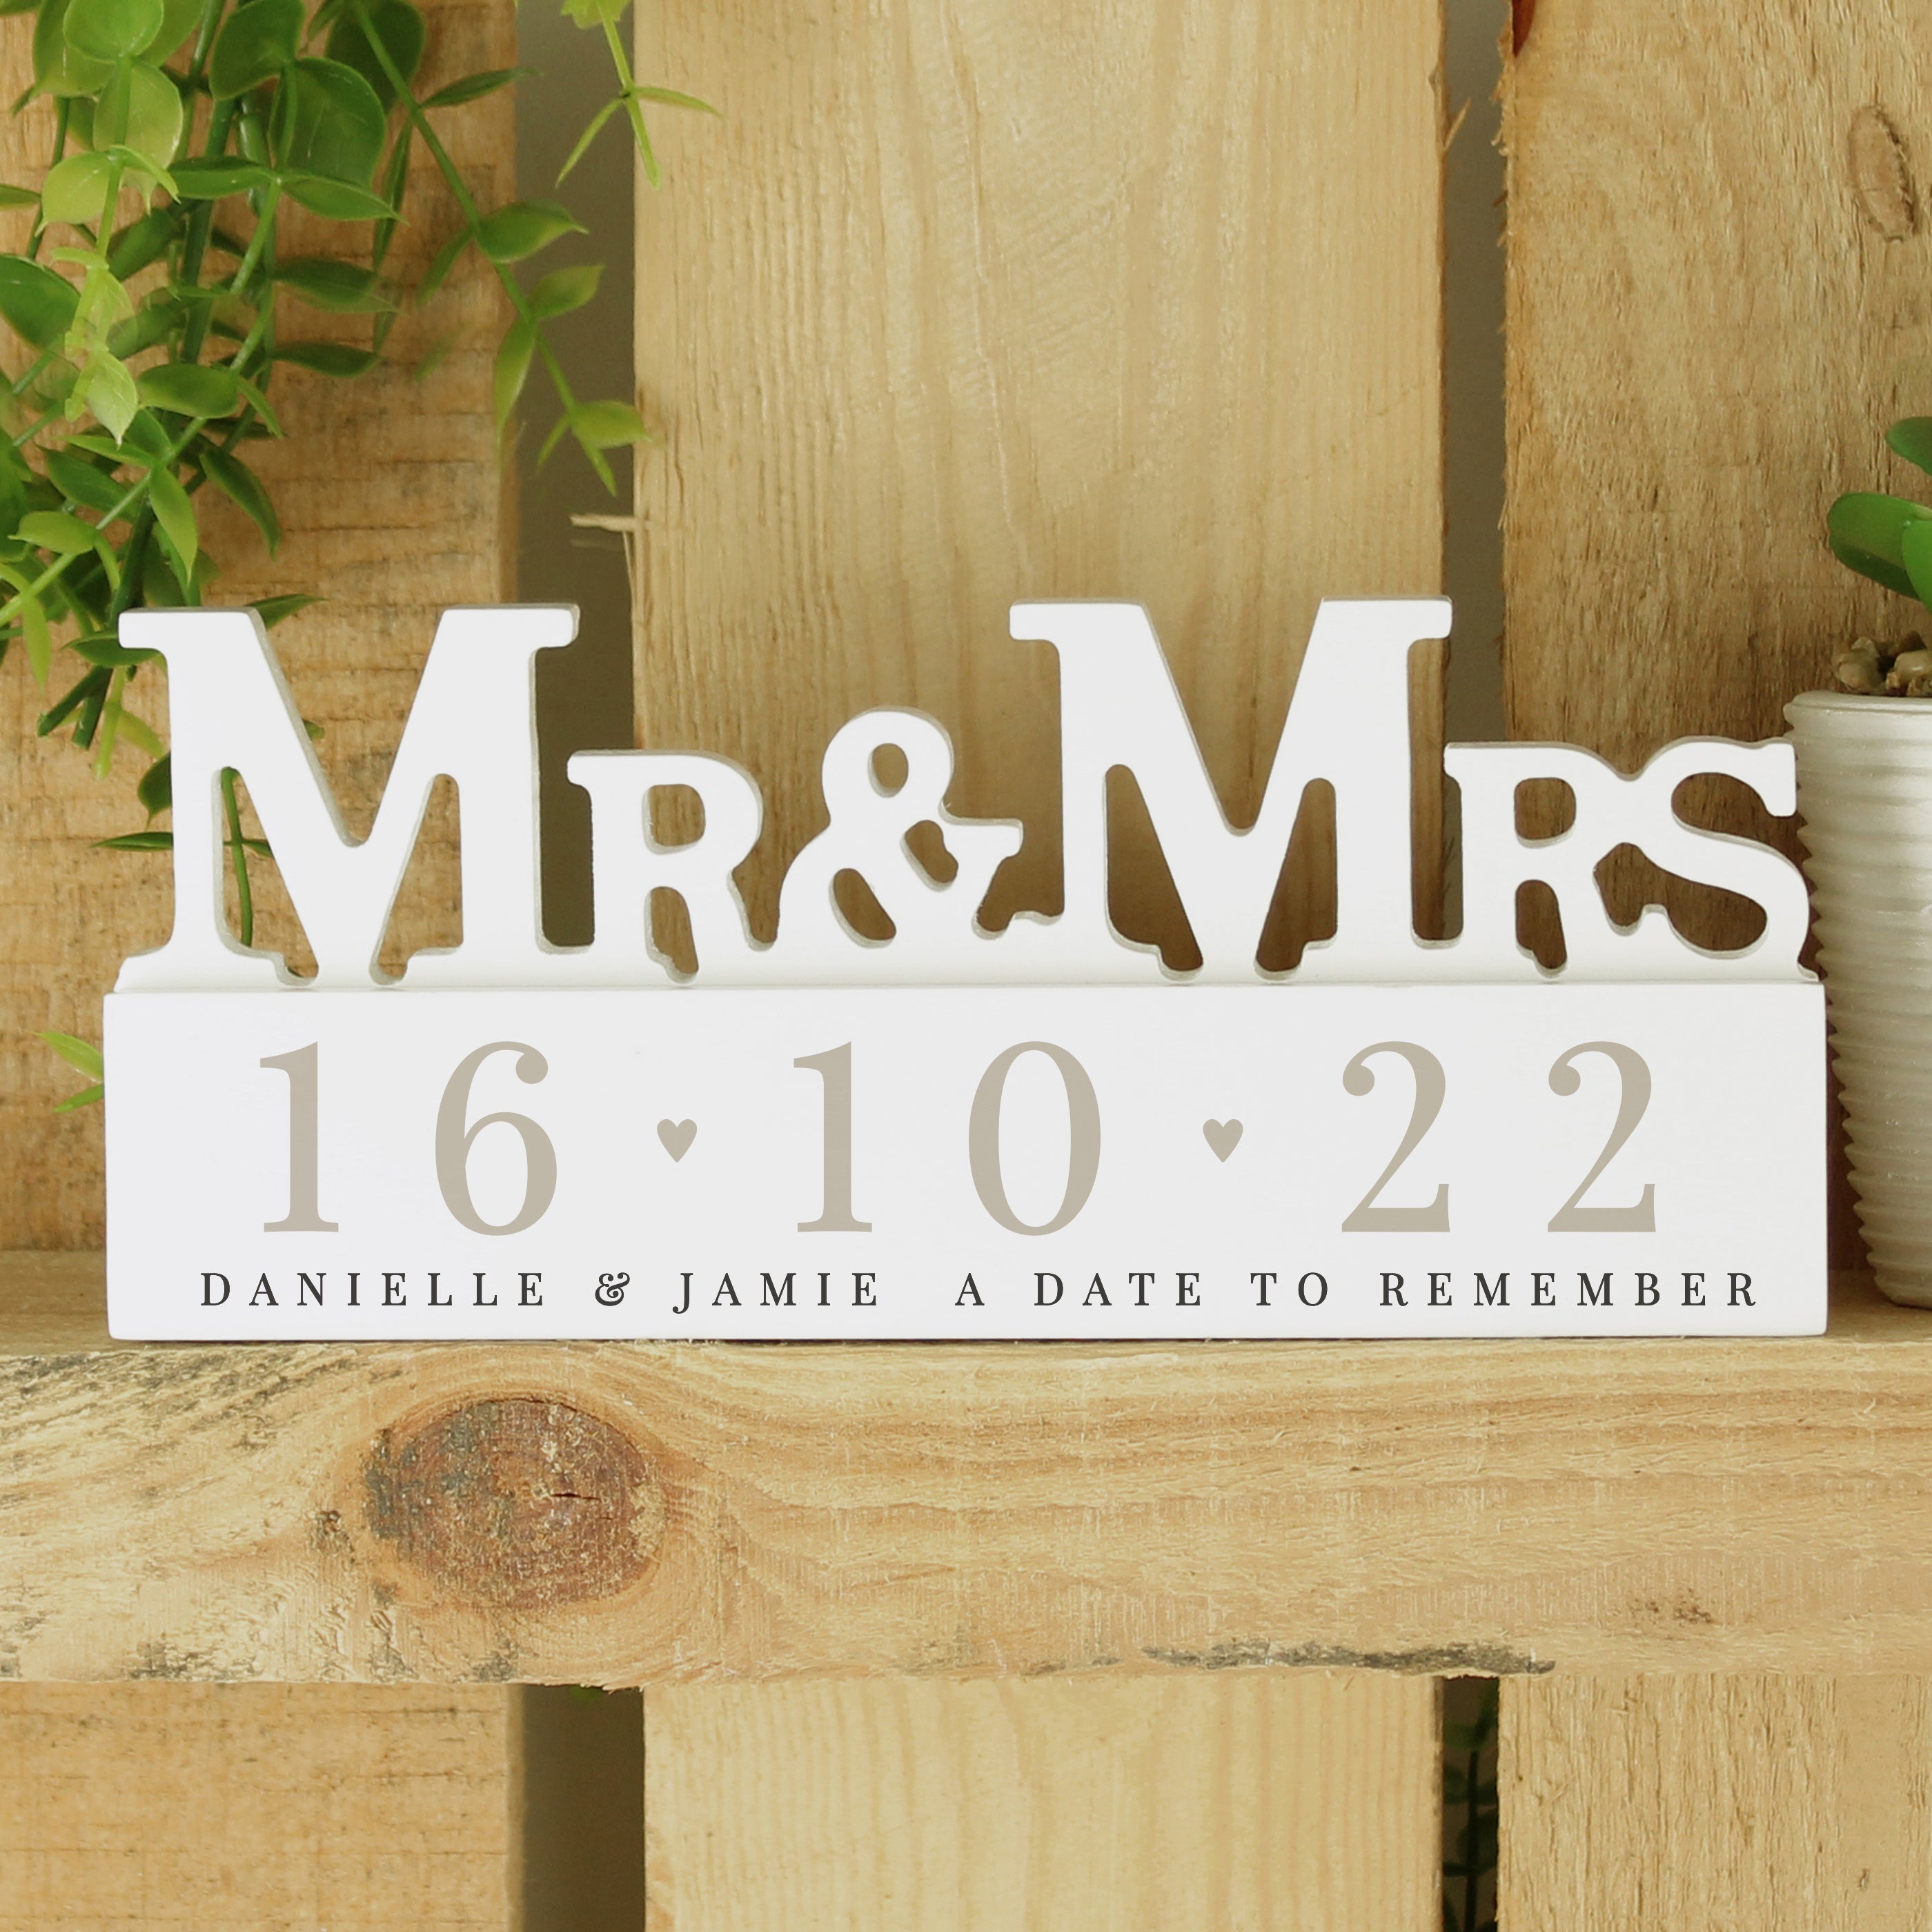 Personalised Big Date Wooden Mr and Mrs Ornament